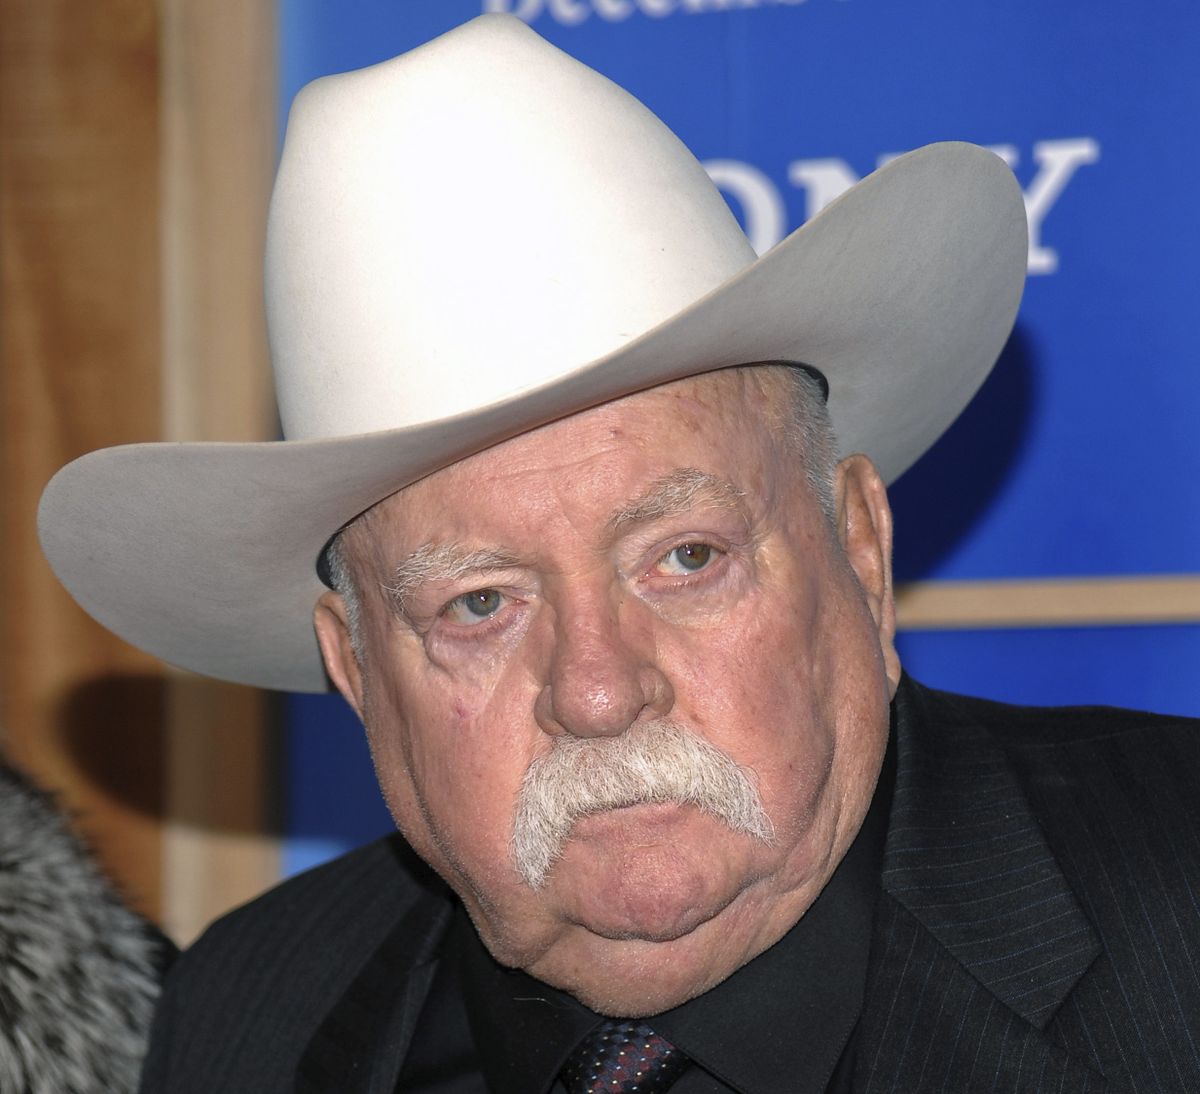 In this Monday, Dec. 14, 2009 file photo, Actor Wilford Brimley attends the premiere of 